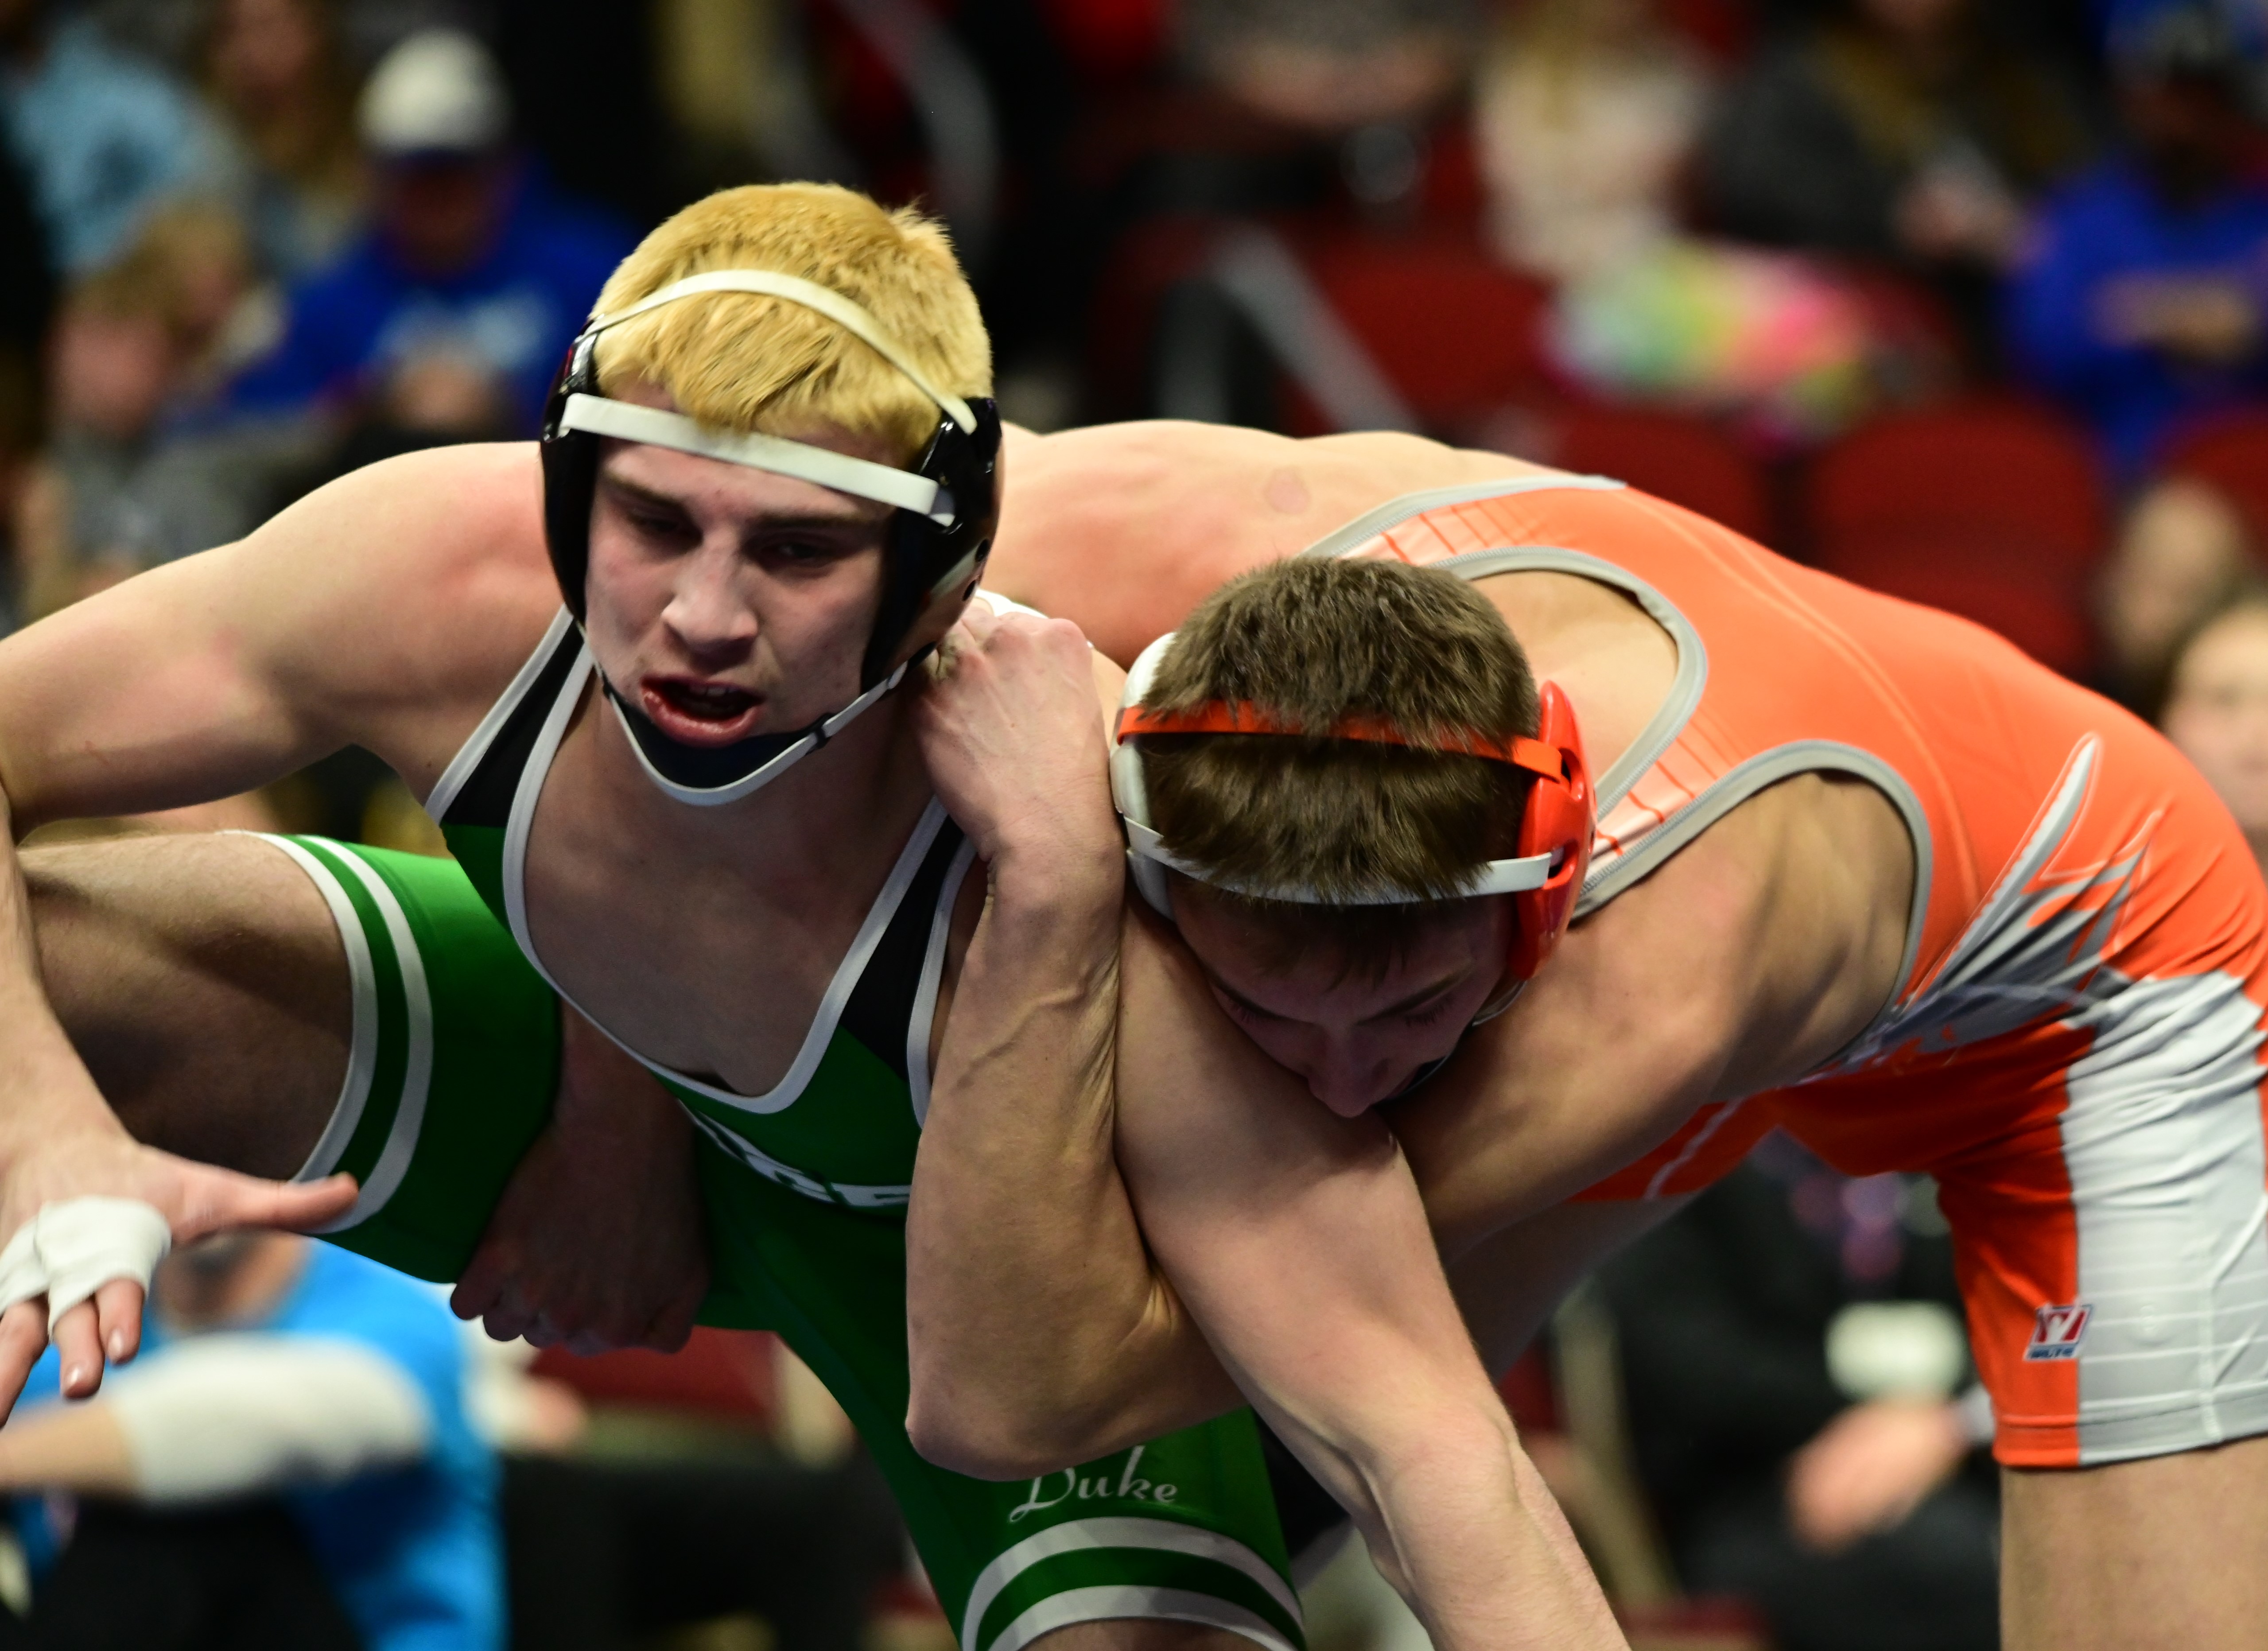 Tucker Stangel of Osage (left) tries to escape the hold of Sergeant Bluff-Luton's Bo Koedam during the Class 2A 157-pound state championship match at the Iowa high school state tournament at Wells Fargo Arena in Des Moines on Saturday. (Photo by Ryan Timmerman)